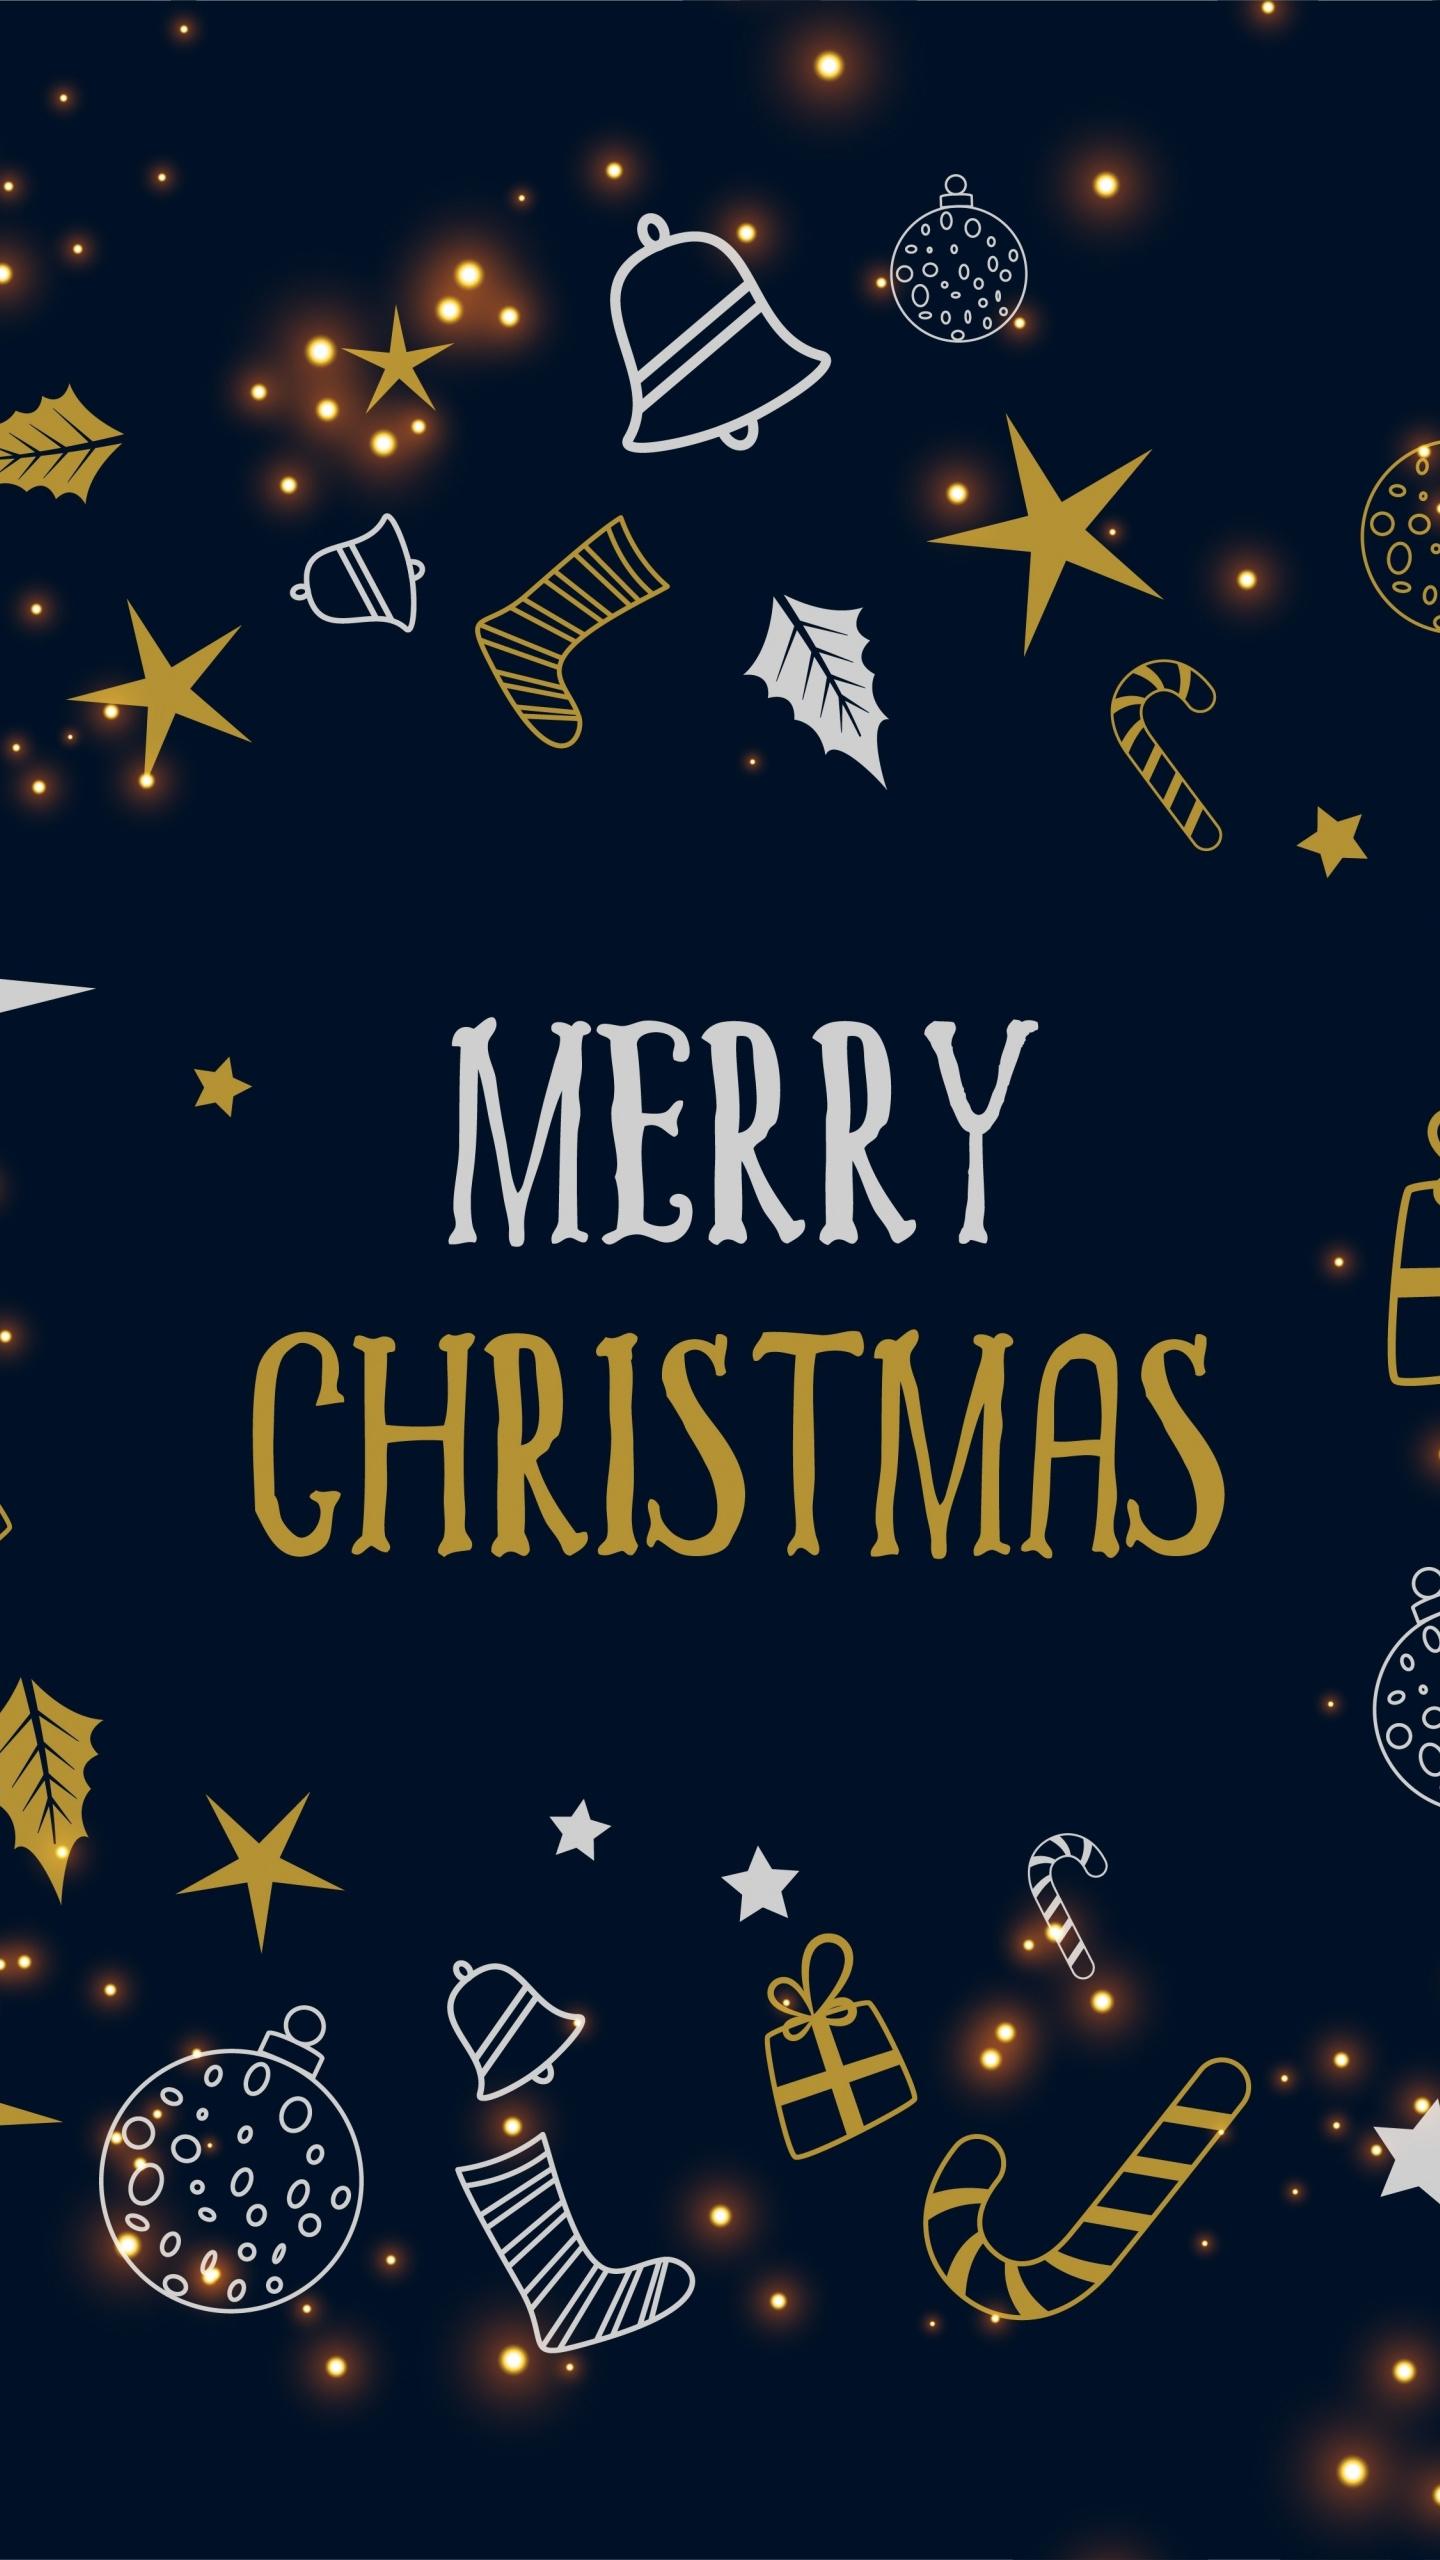 Download 1440x2560 wallpapers 2019 merry christmas, abstract